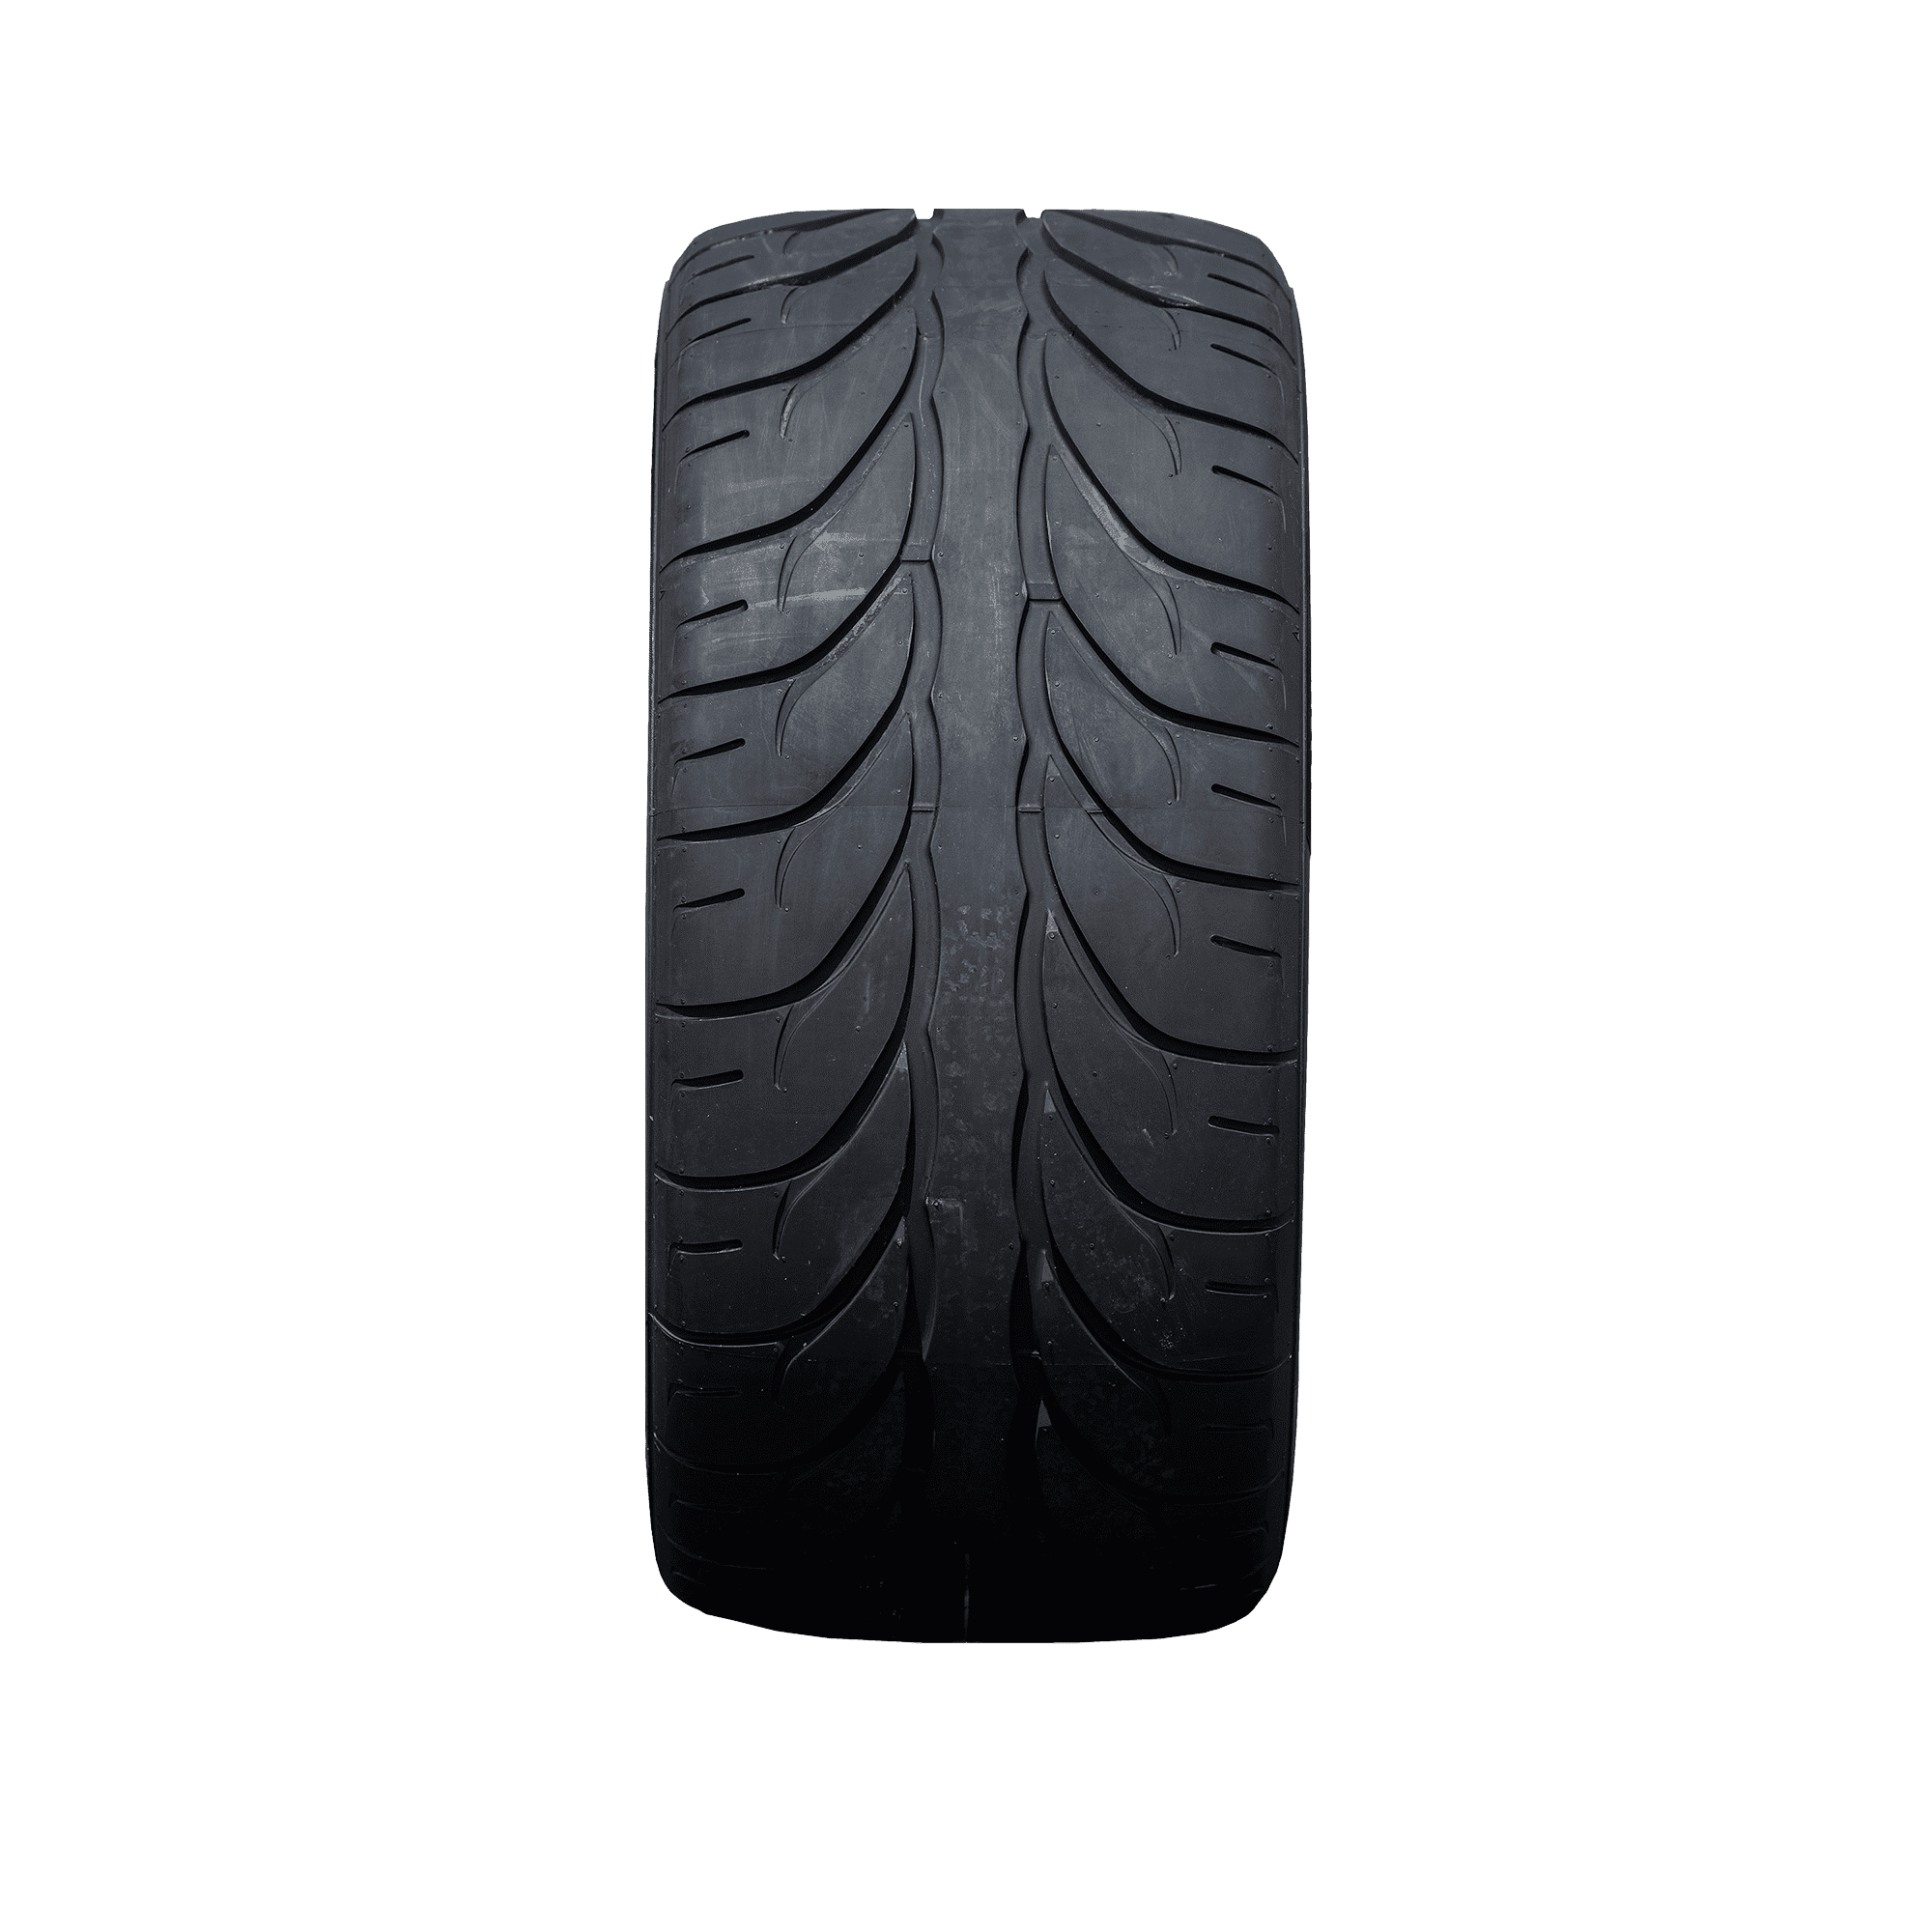 Shop for 235/40R17 Tires for Your Vehicle | SimpleTire